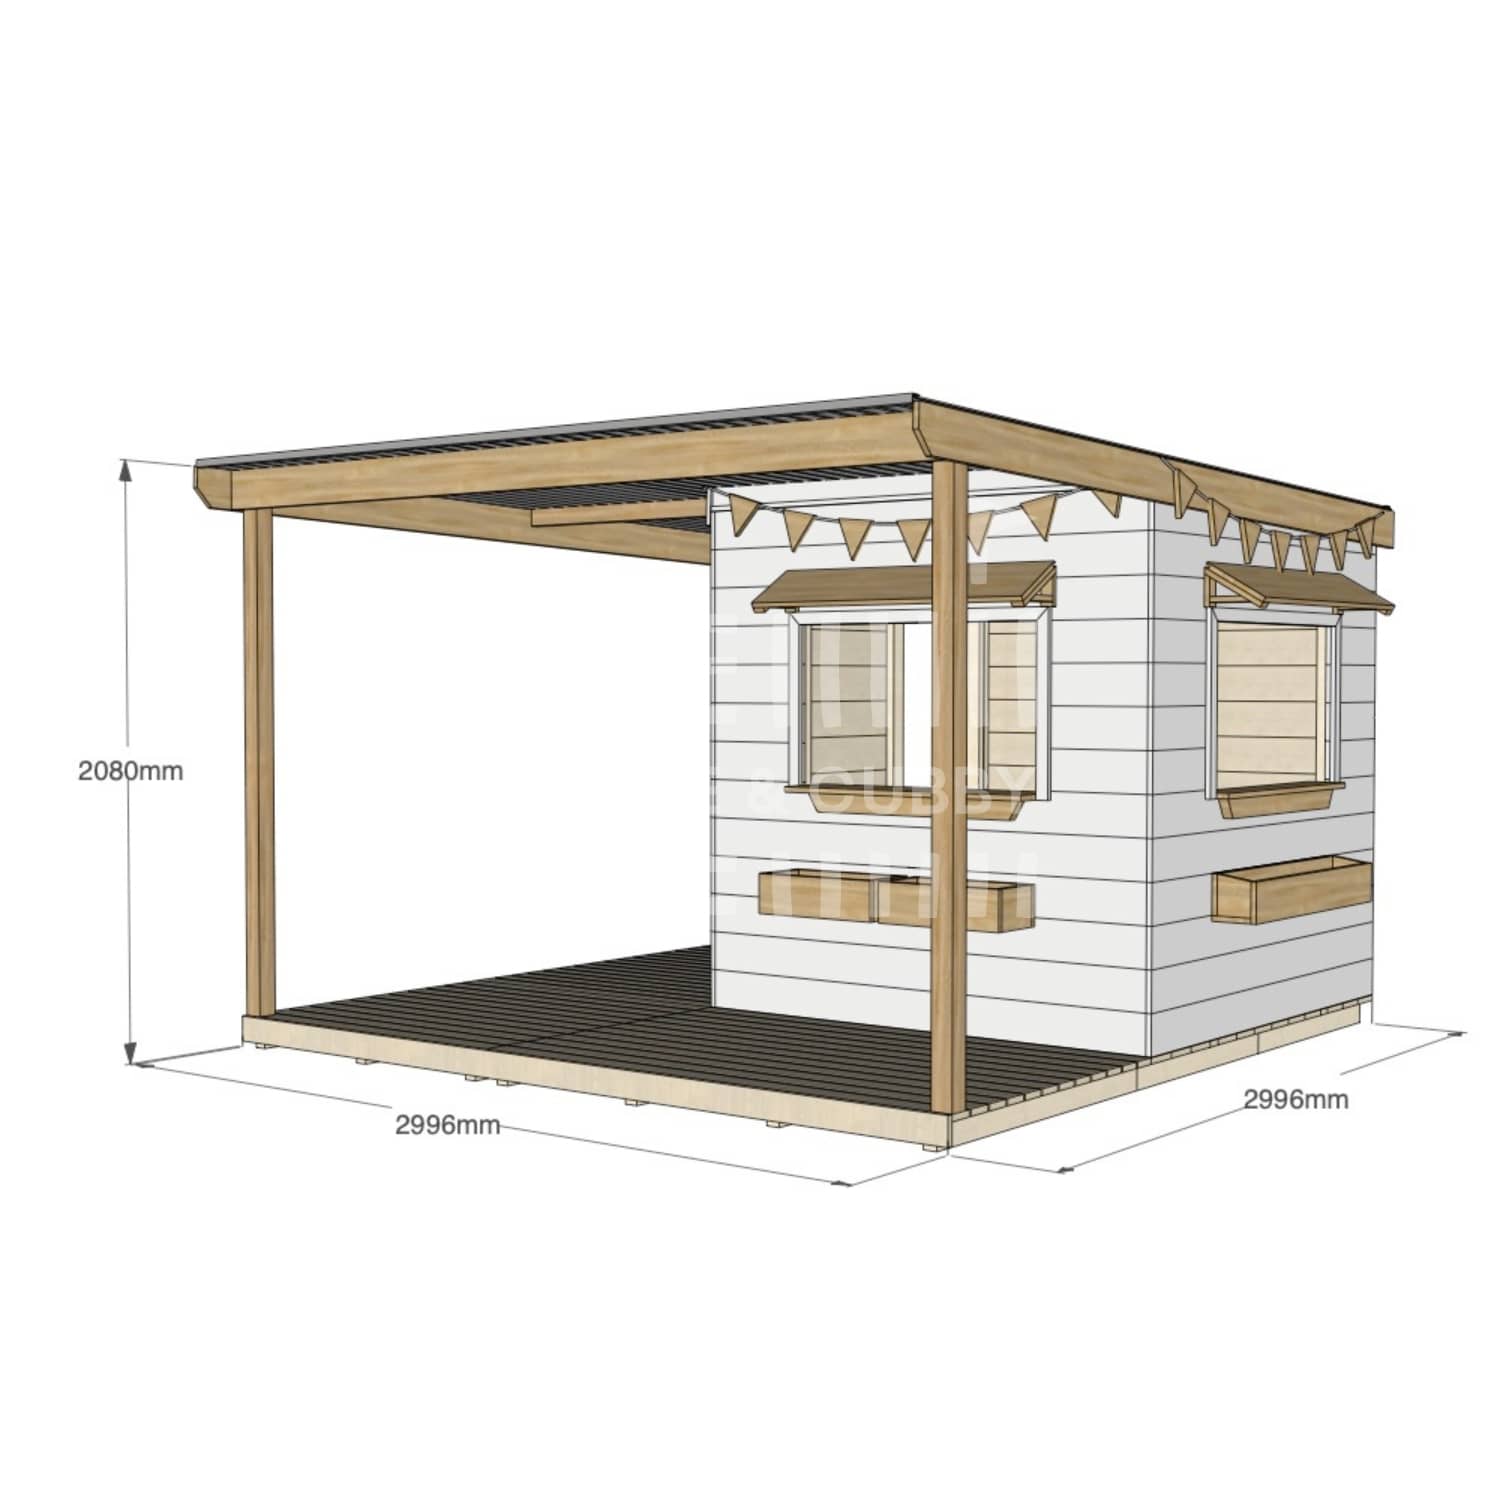 Commercial grade extended height painted midi square pine timber cubby house with wraparound verandah, accessories and dimensions